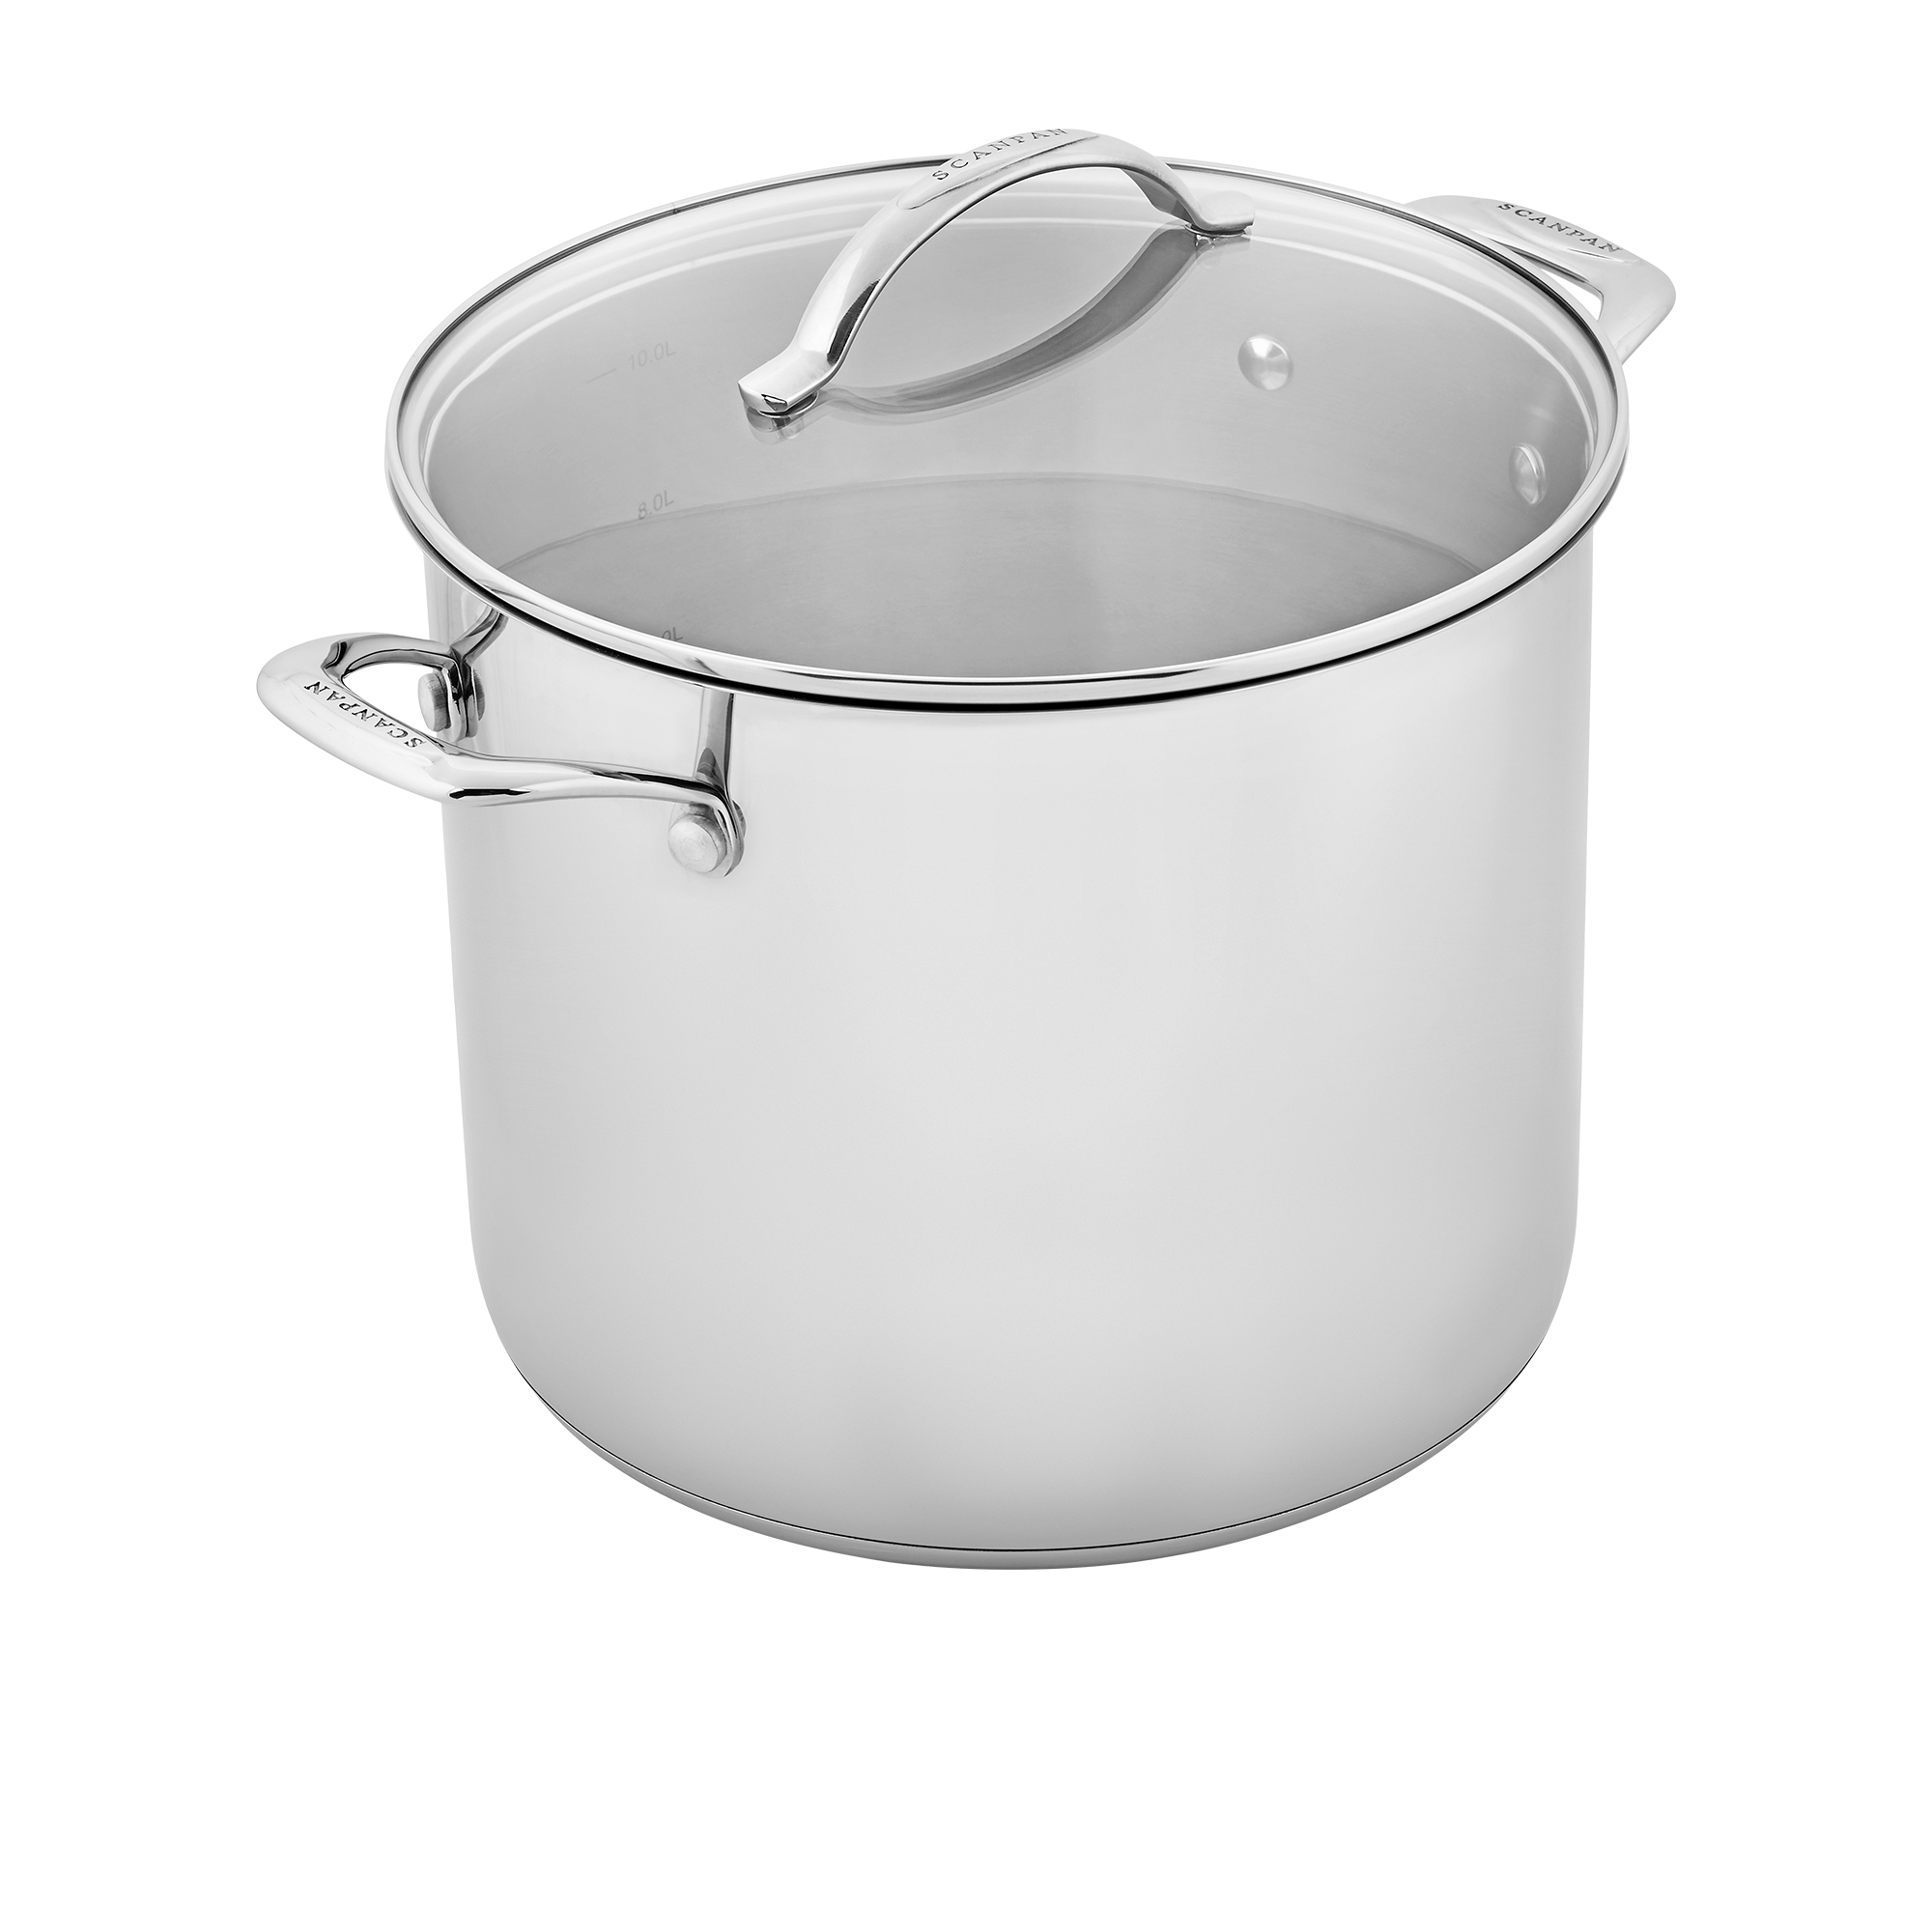 Scanpan STS Stainless Steel Stockpot 26cm - 11L Image 1